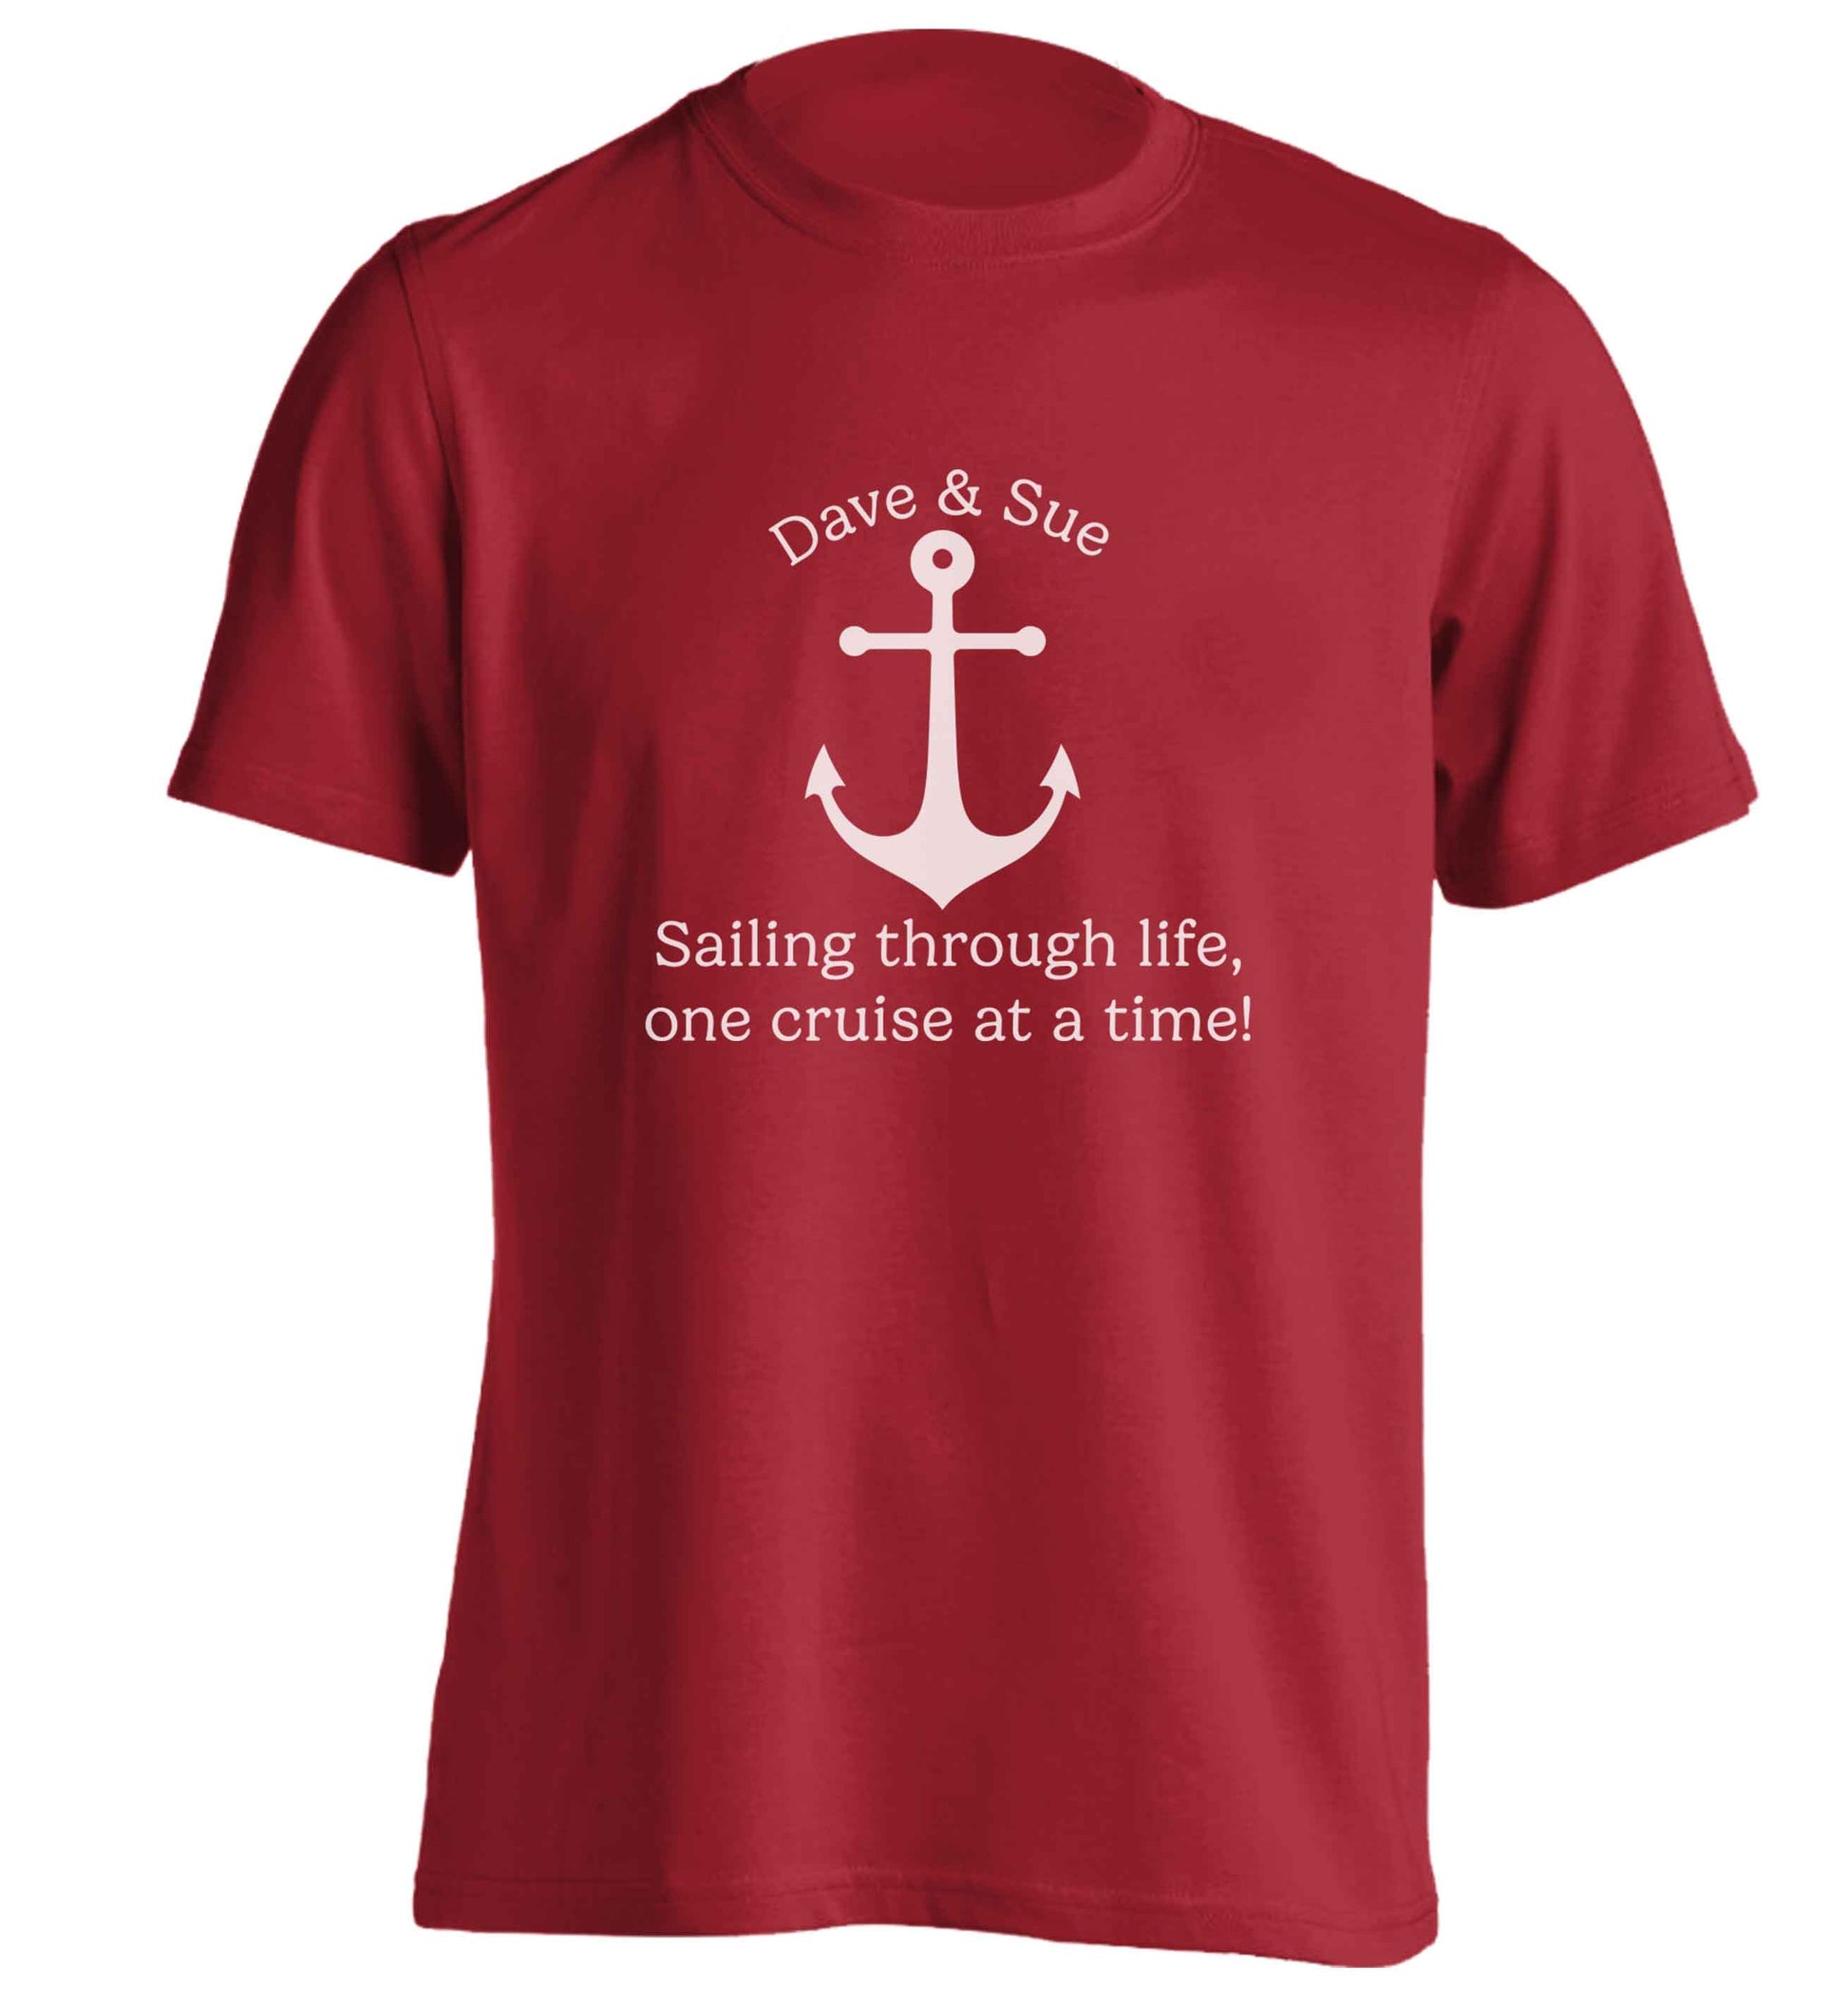 Sailing through life one cruise at a time - personalised adults unisex red Tshirt 2XL